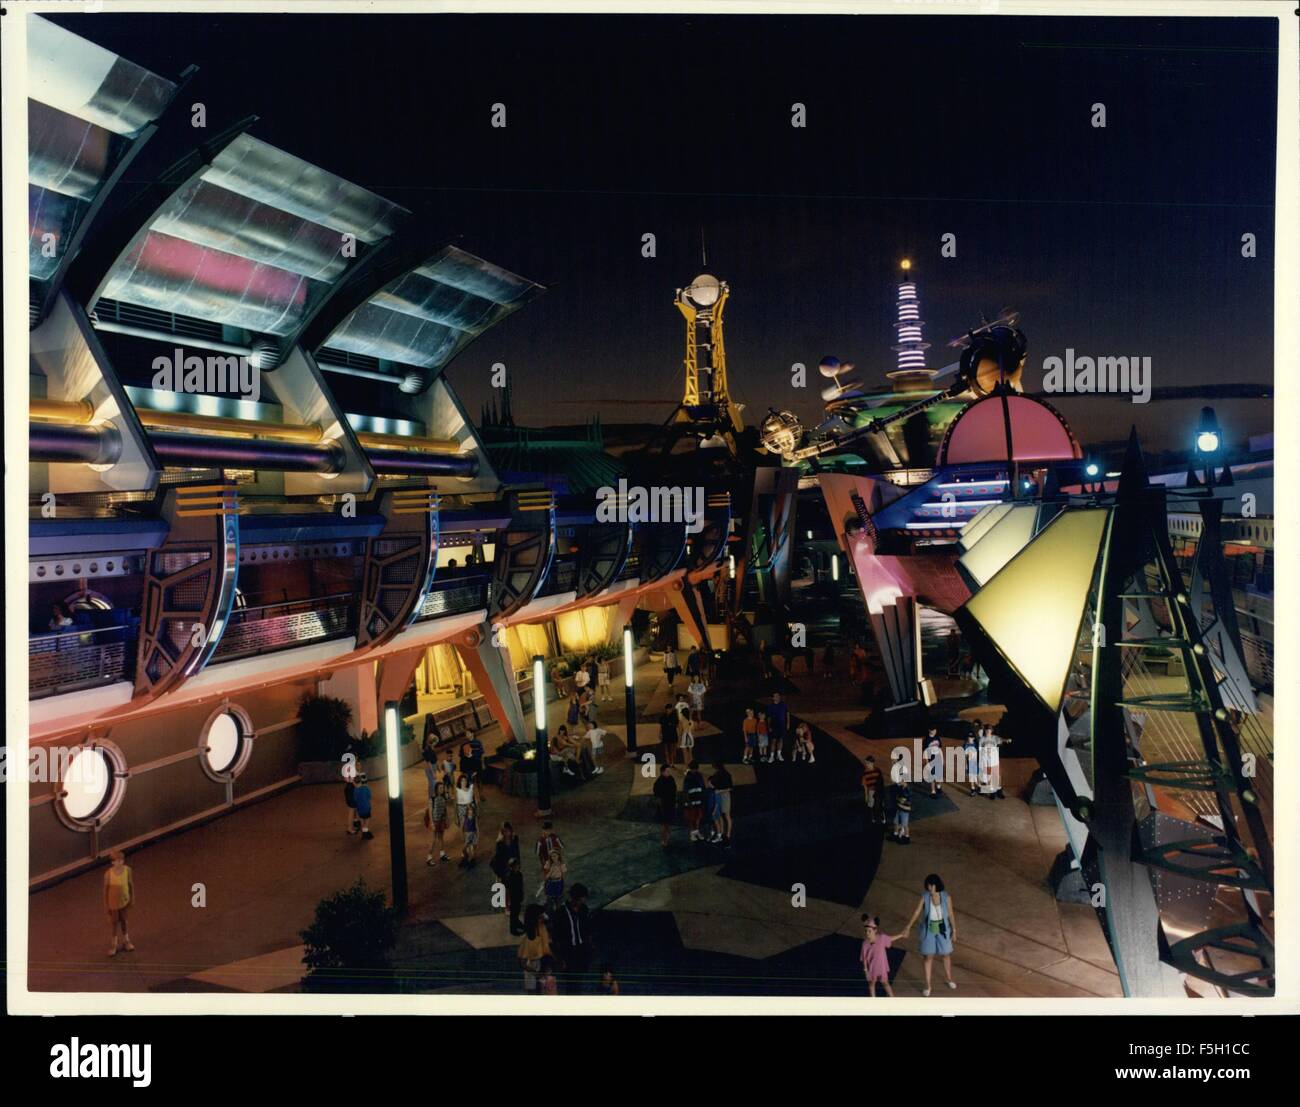 1994 - Tomorrowland To Become Fantasy Future City The future that never was is just around the corner in the Magic Kingdom at the Walt Disney World Resort. A brand new Tommorrowland welcomes visitors with a future-town friendly neighbourhood atmosphere, like the other lands in the Magic Kingdom. New attractions and shows provide entertainment to park guests. © Keystone Pictures USA/ZUMAPRESS.com/Alamy Live News Stock Photo